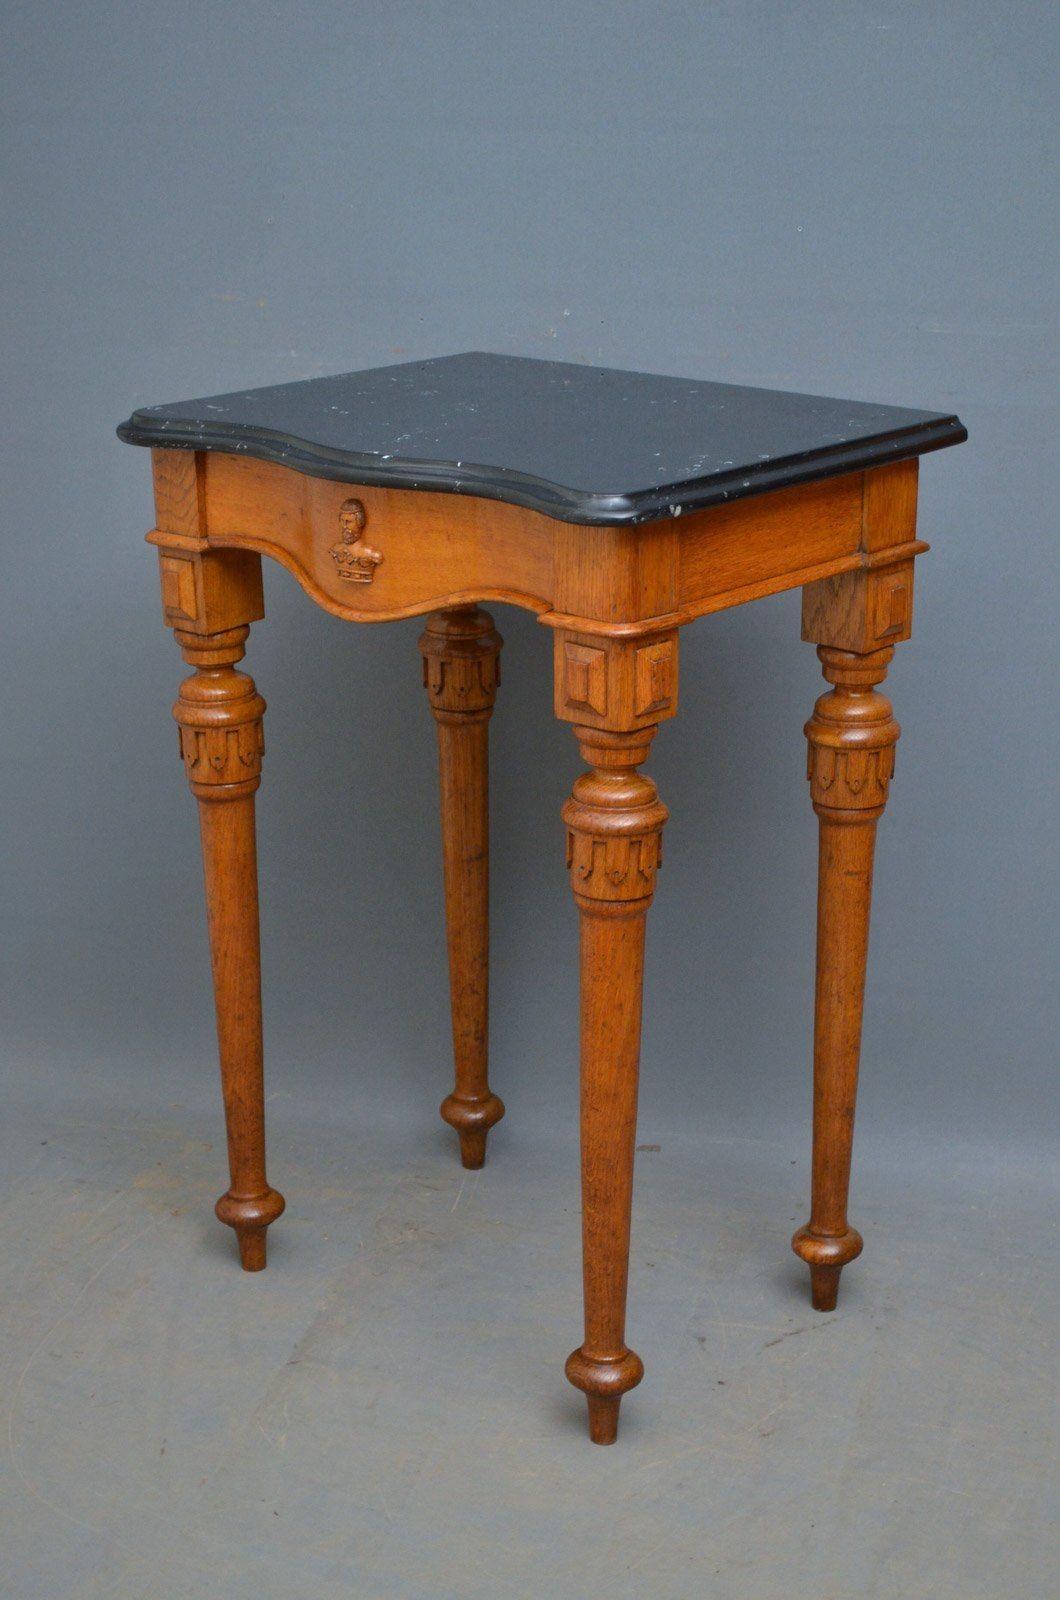 J00 Victorian, Gothic Revival oak hall table, having serpentine black veined marble top above frieze drawer, all standing on turned and carved tapered legs. This antique hall table is ready to place at home c1870
H36